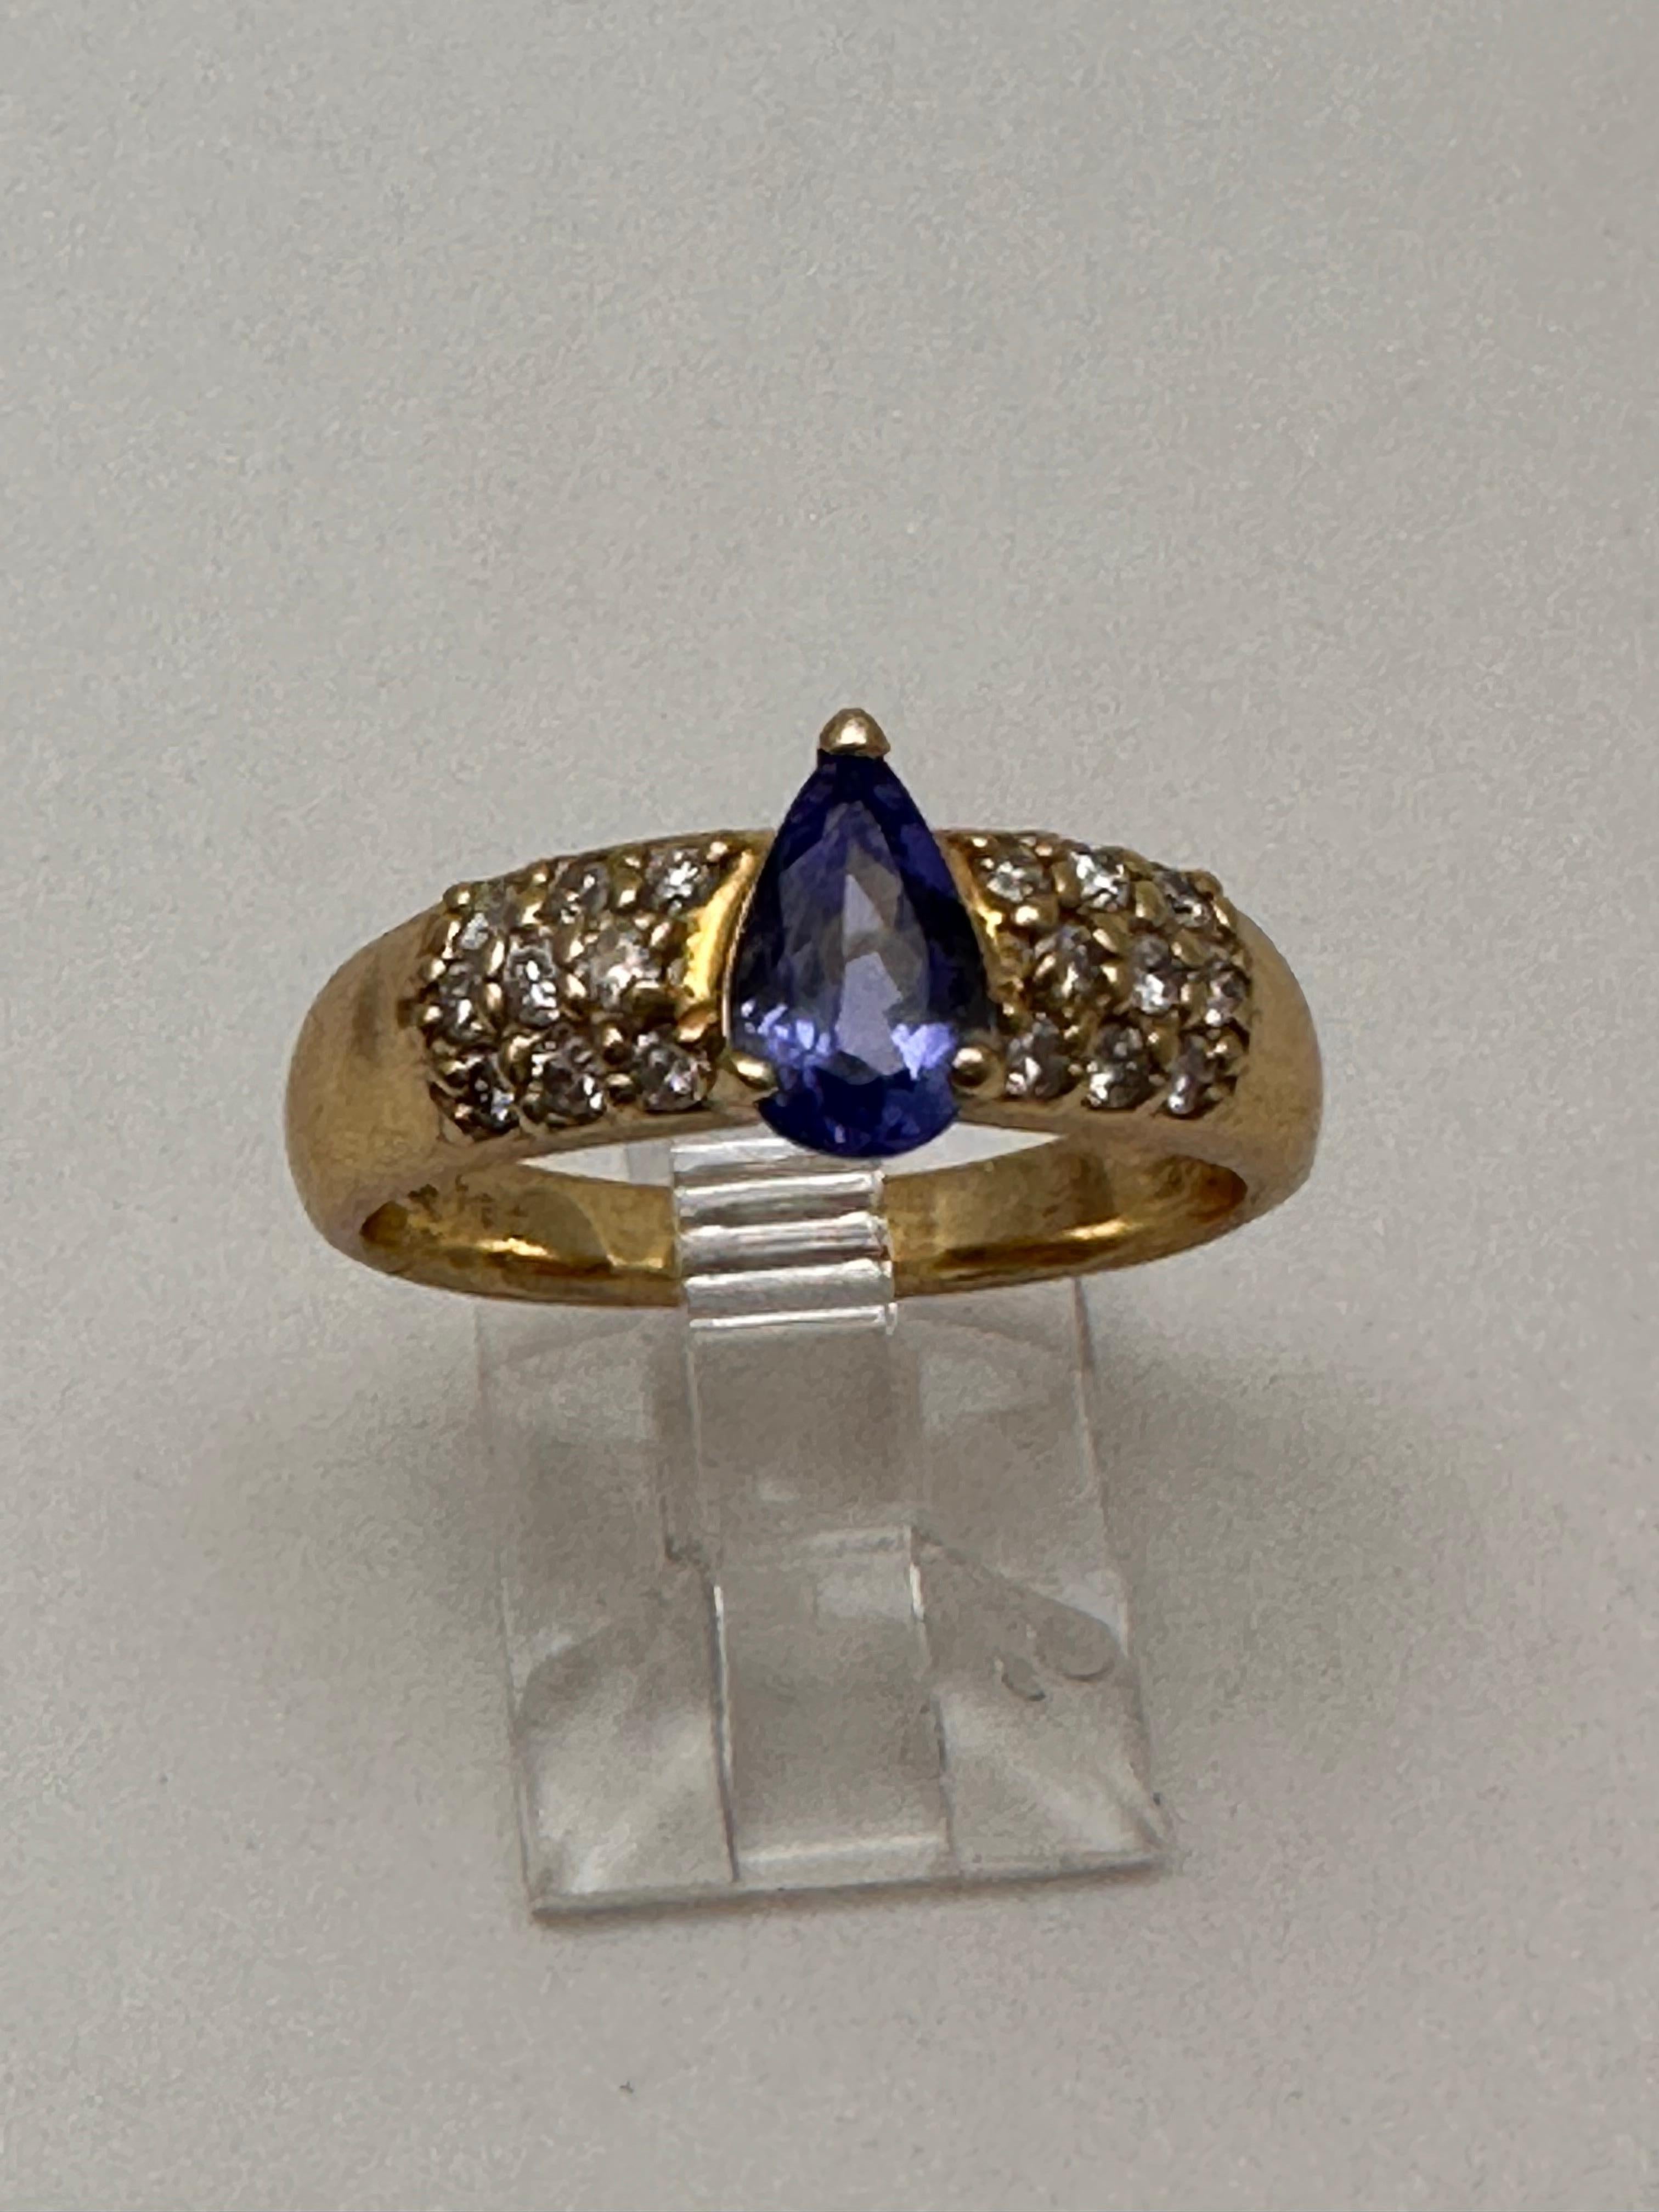 14k Yellow Gold approx. 5.5mm x 8.5mm Pear Shape Tanzanite 
18 side Diamonds 
Ring Size 7 1/2

Tanzanite 

Tanzanite changes colors when it is viewed from different directions. This shifting of colors has been said to facilitate raising